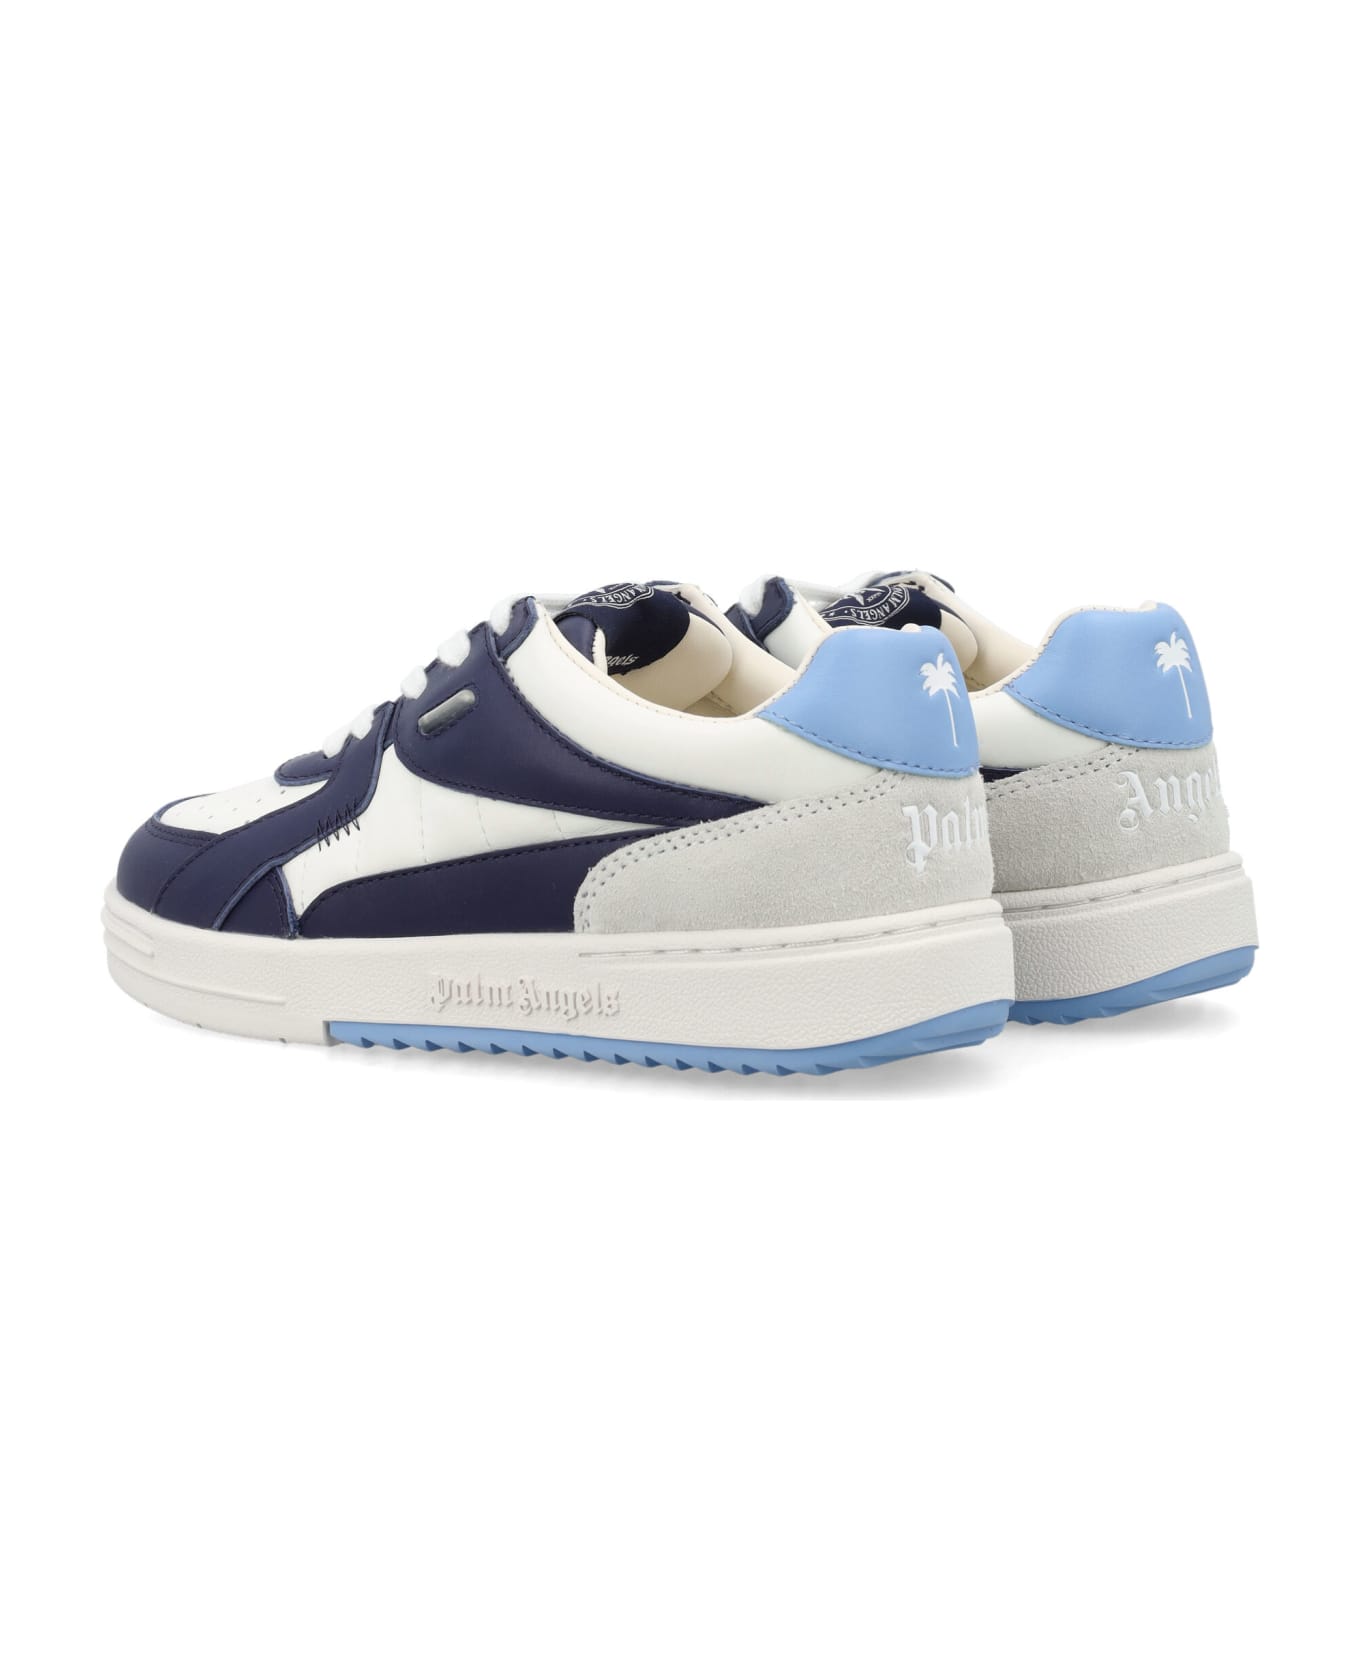 Palm Angels University Sneakers - WHITE BLUE